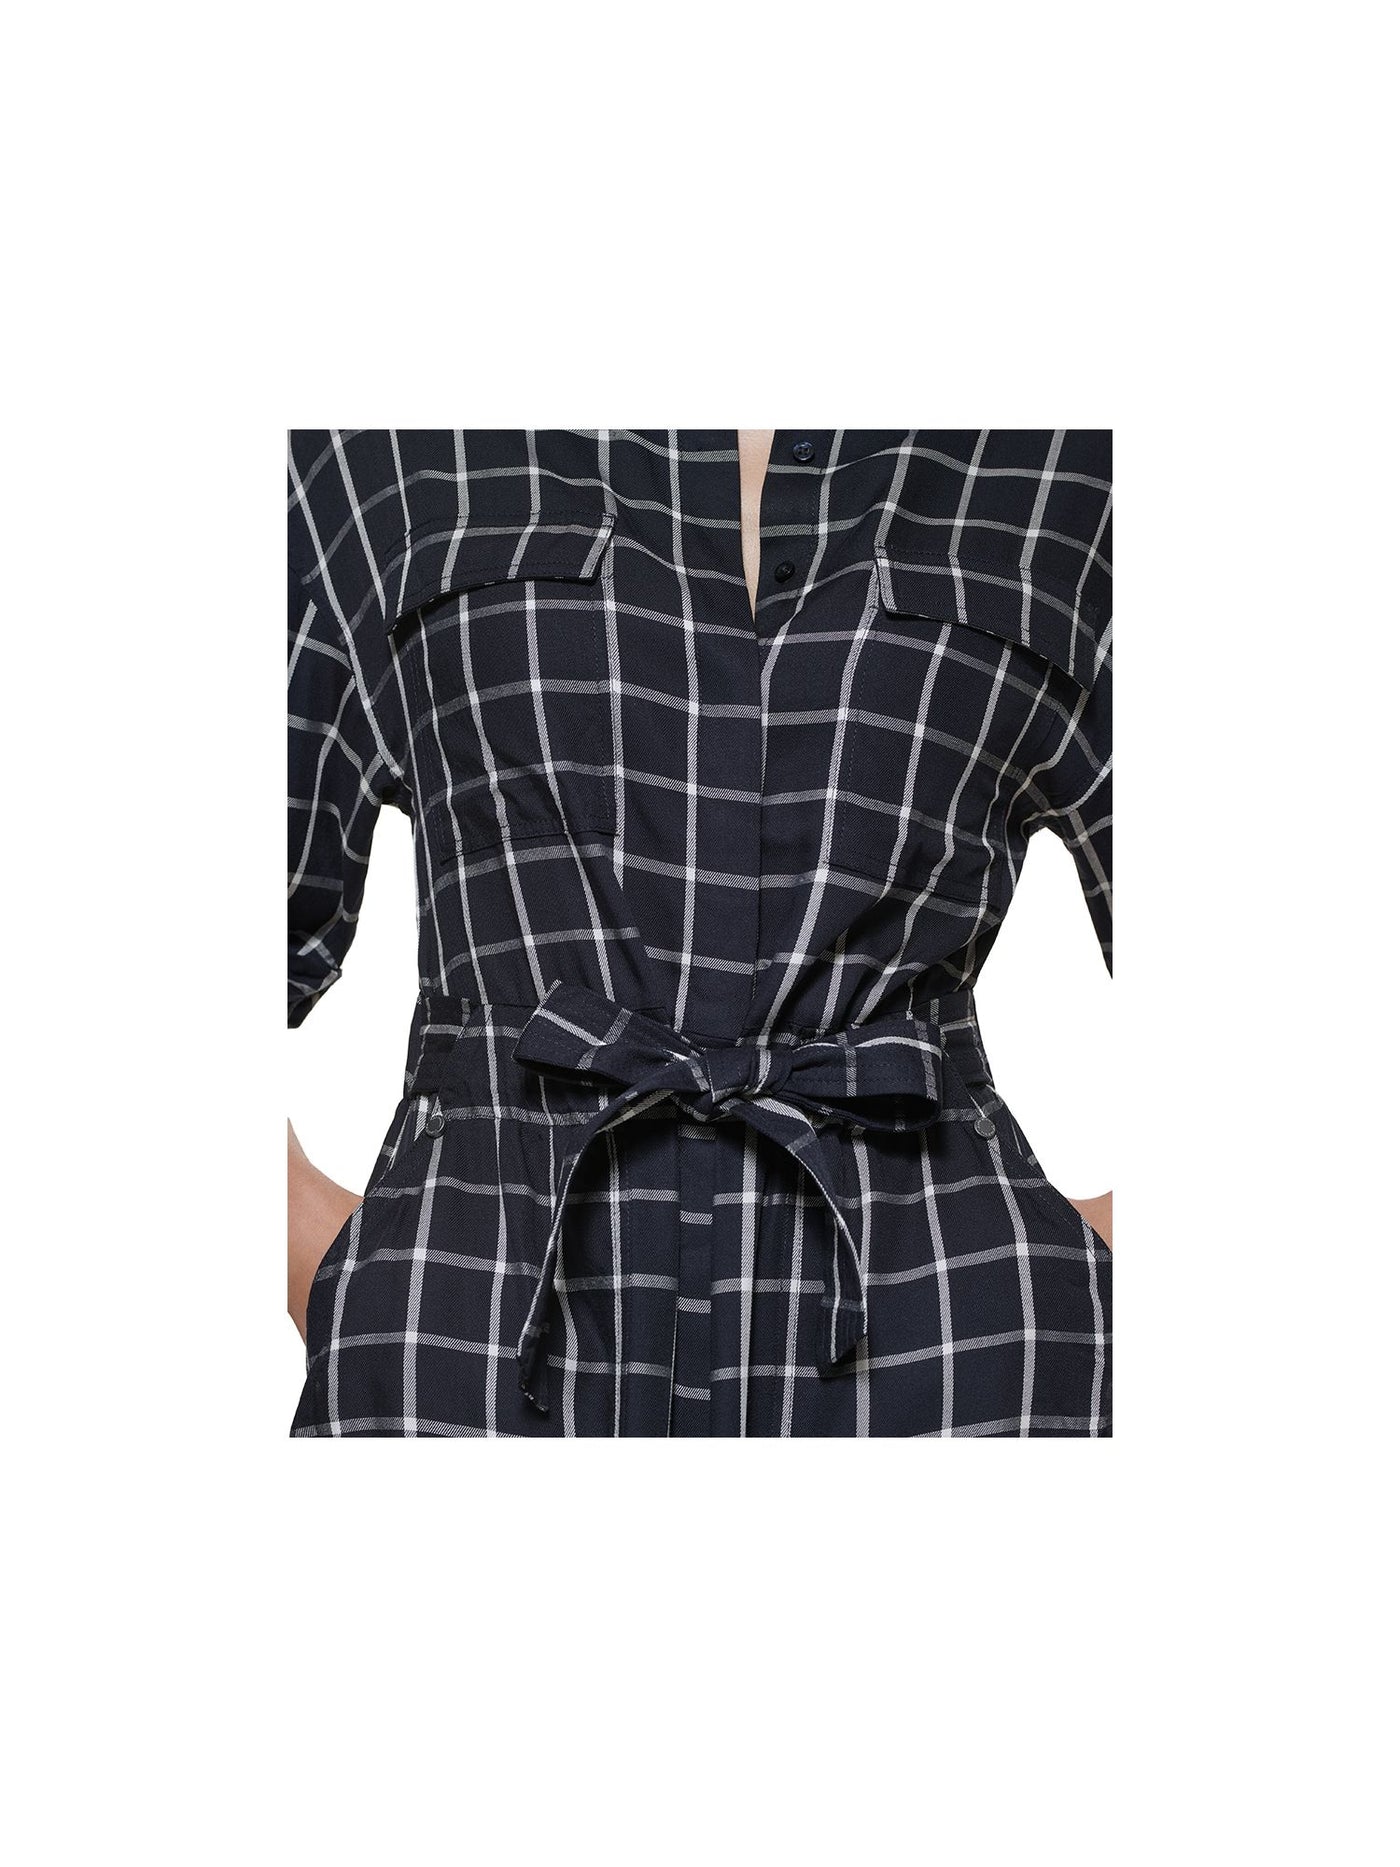 CALVIN KLEIN Womens Navy Tie Unlined Plaid Elbow Sleeve Collared Tea-Length Wear To Work Shift Dress